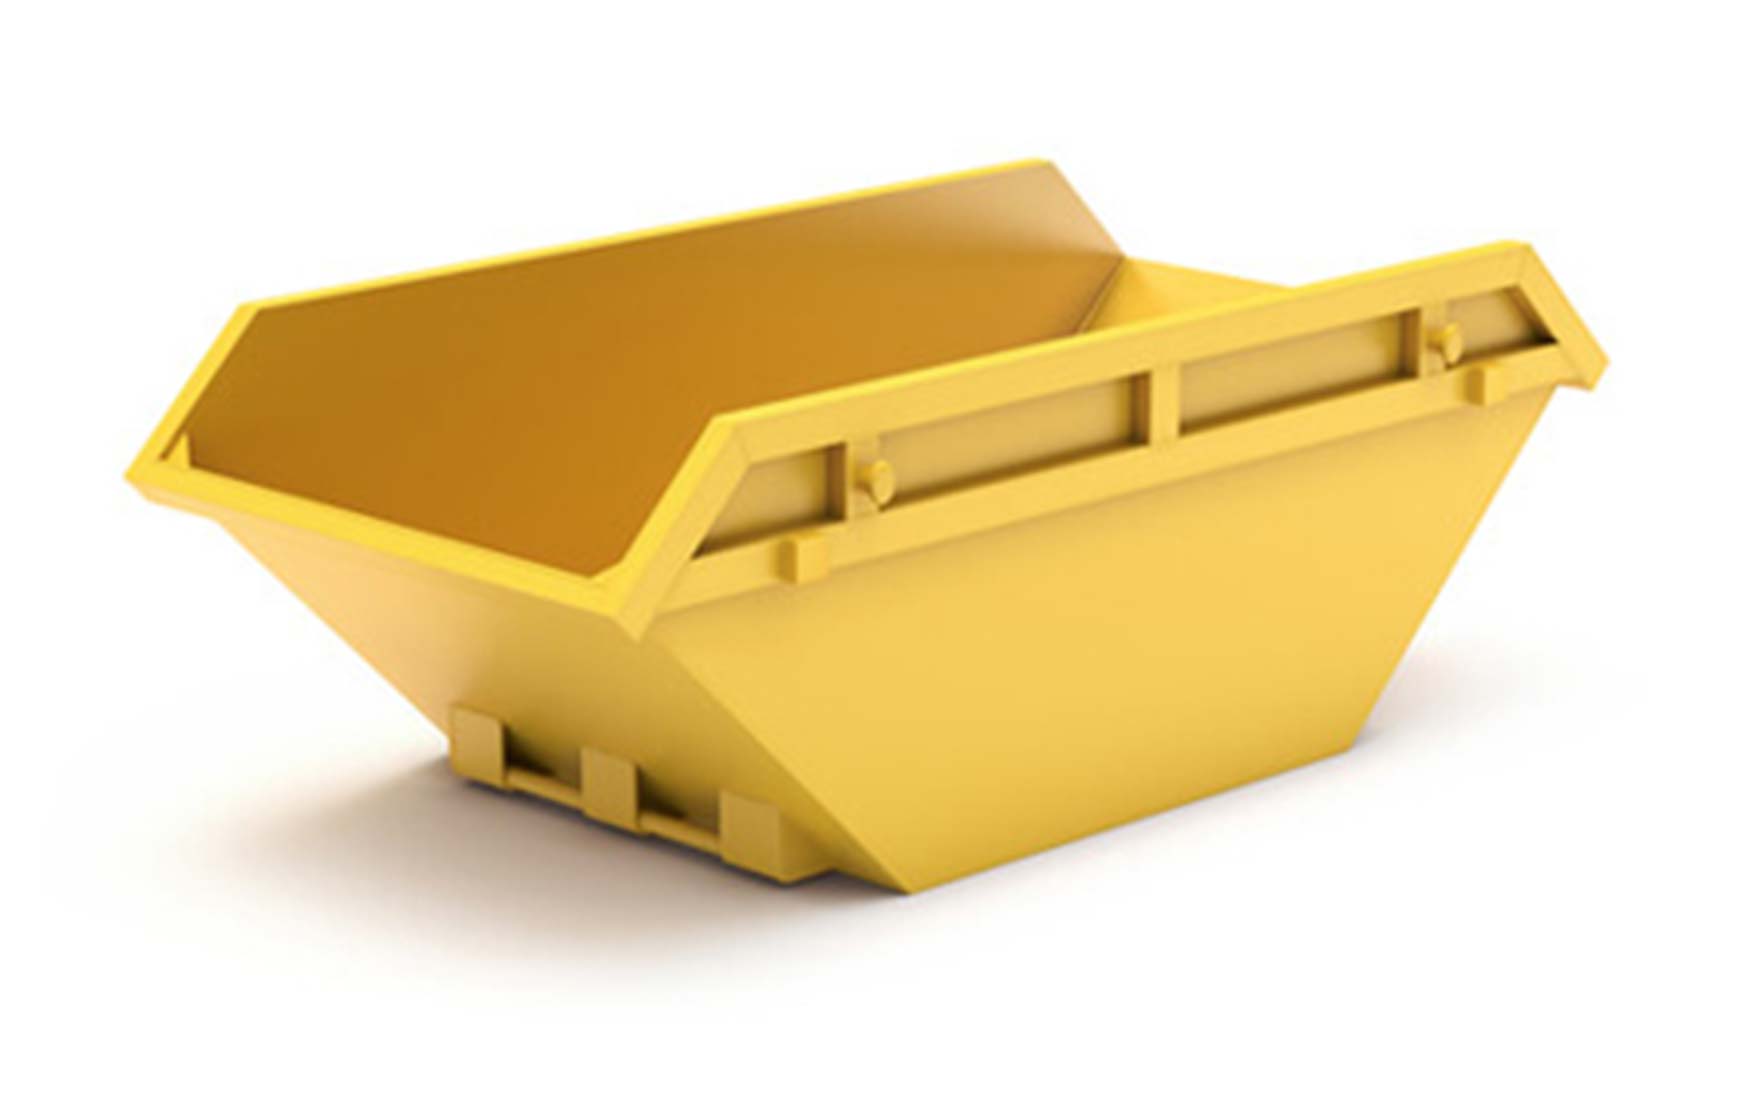 a yellow dumpster is sitting on a white surface